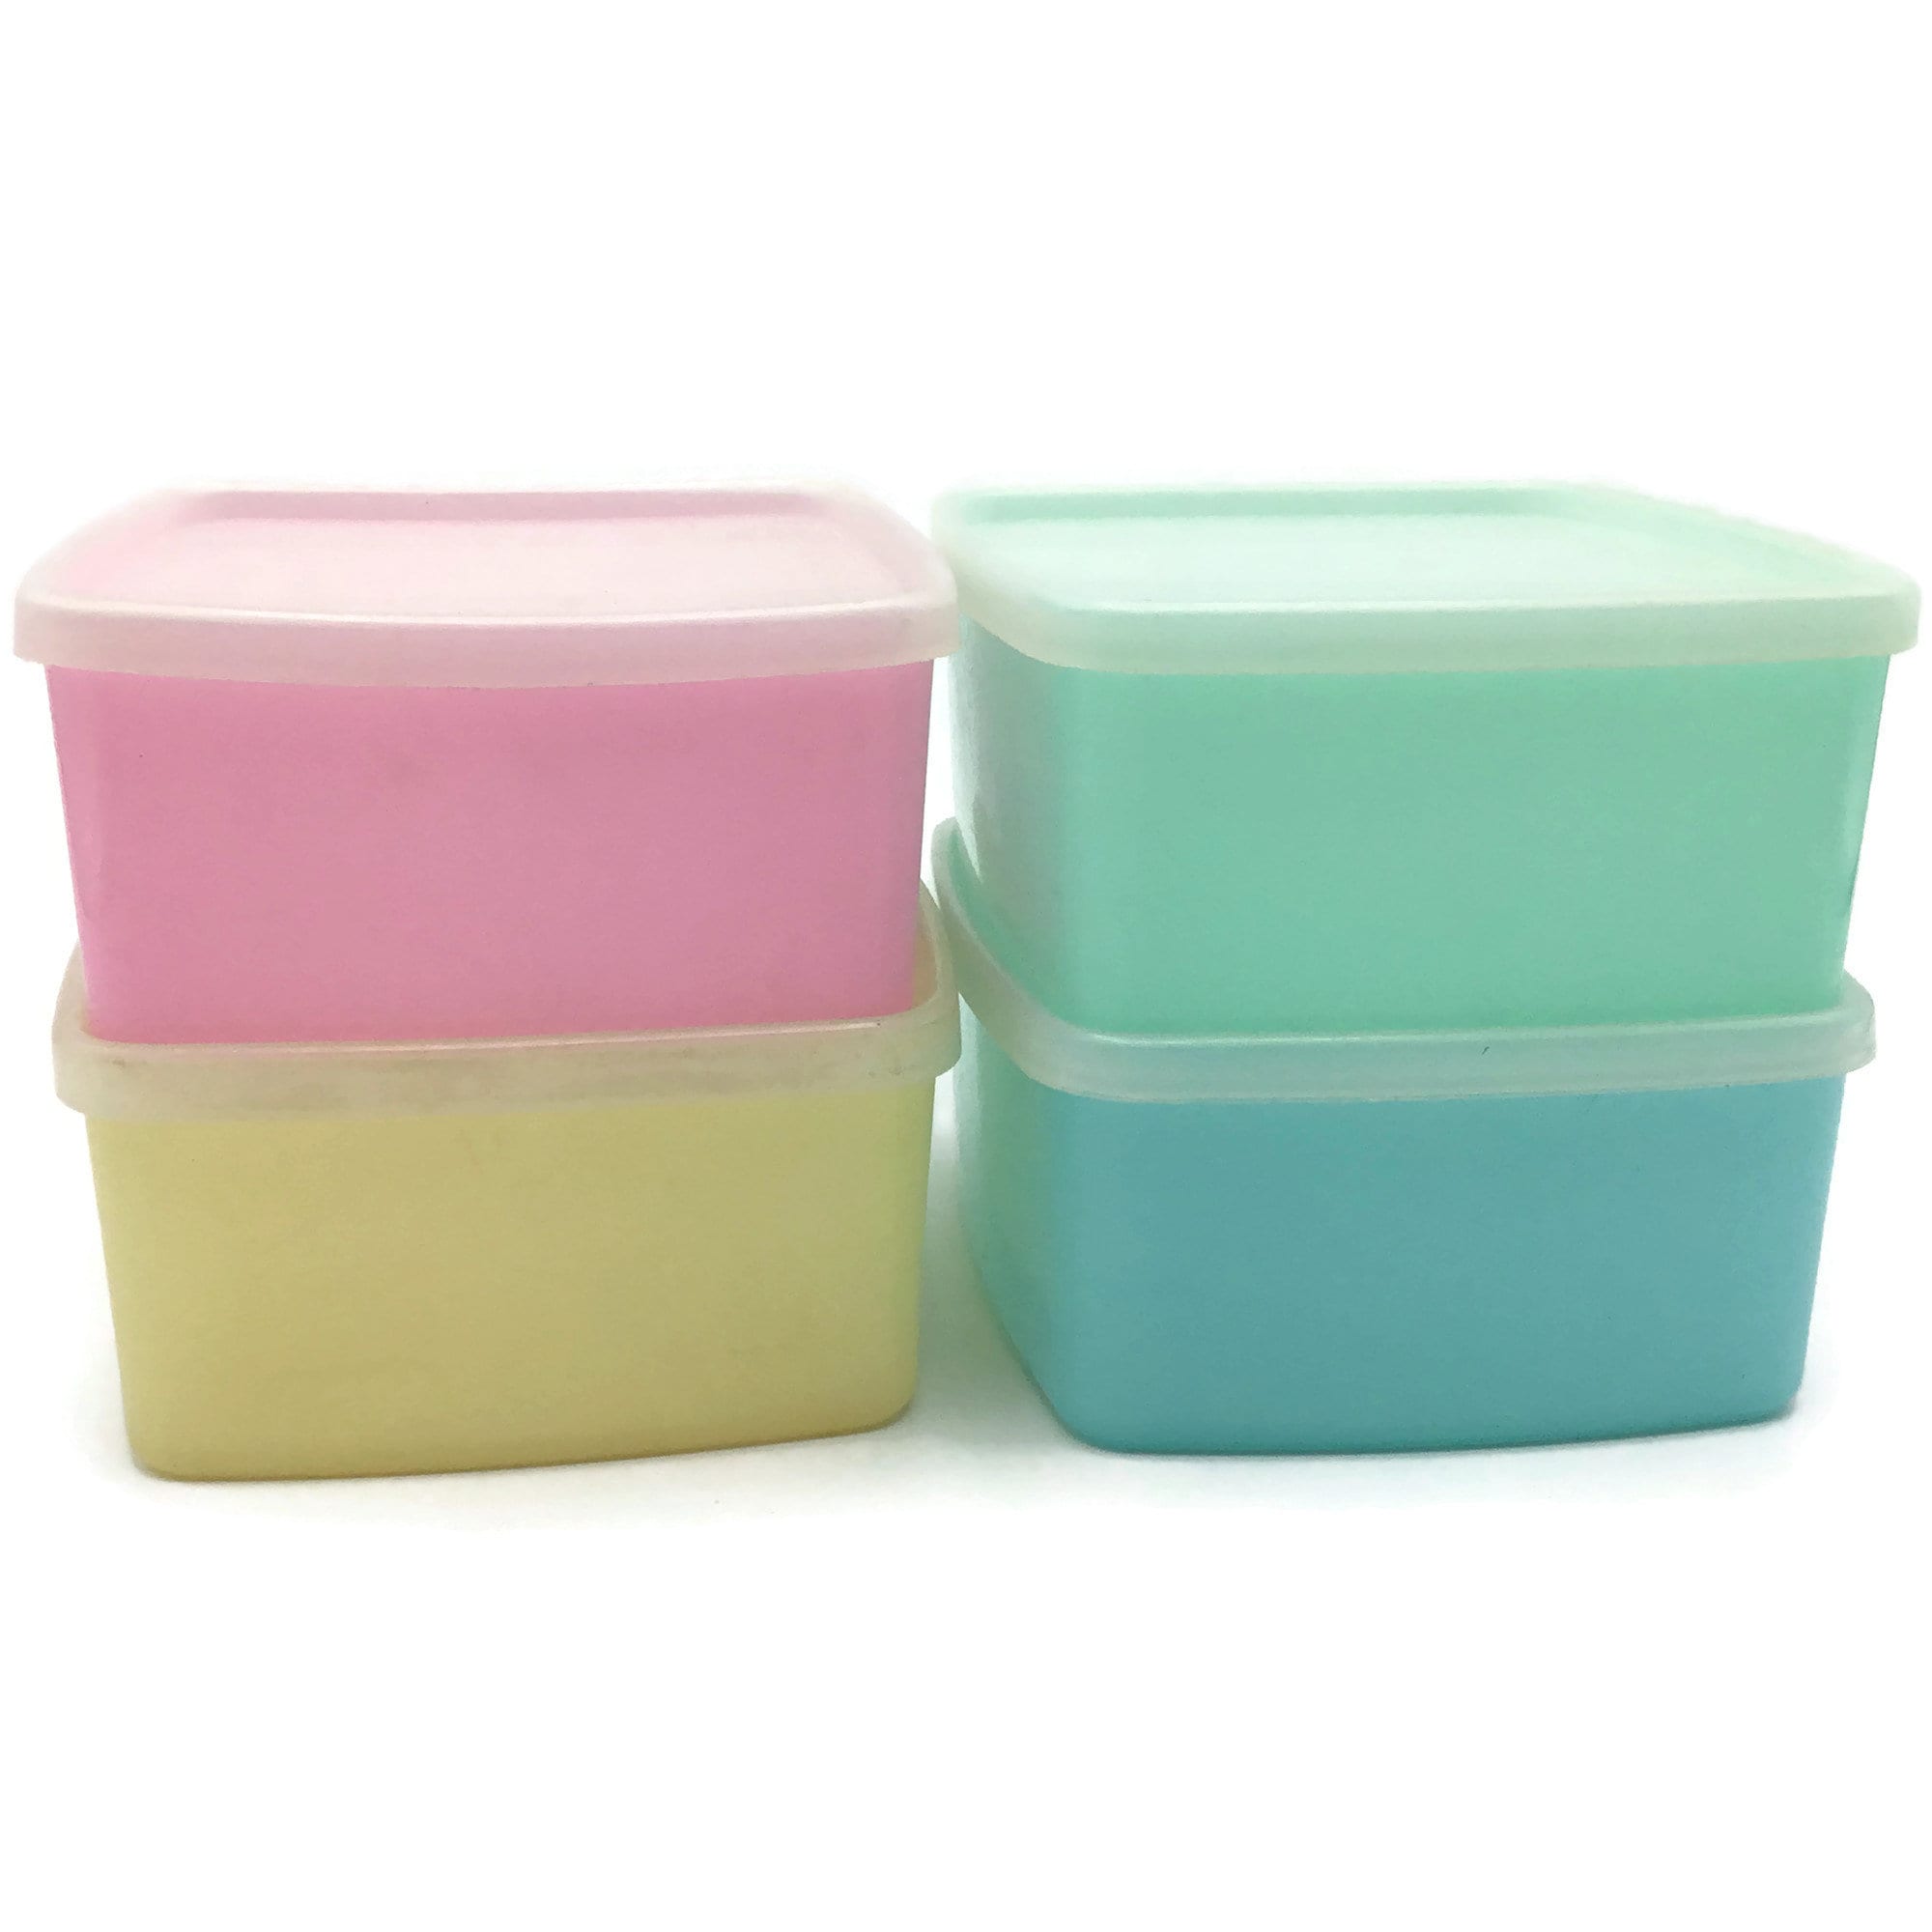 TUPPERWARE CONTAINERS ROUND with Lids Hot Pink, Neon Yellow MINT $18.50 -  PicClick